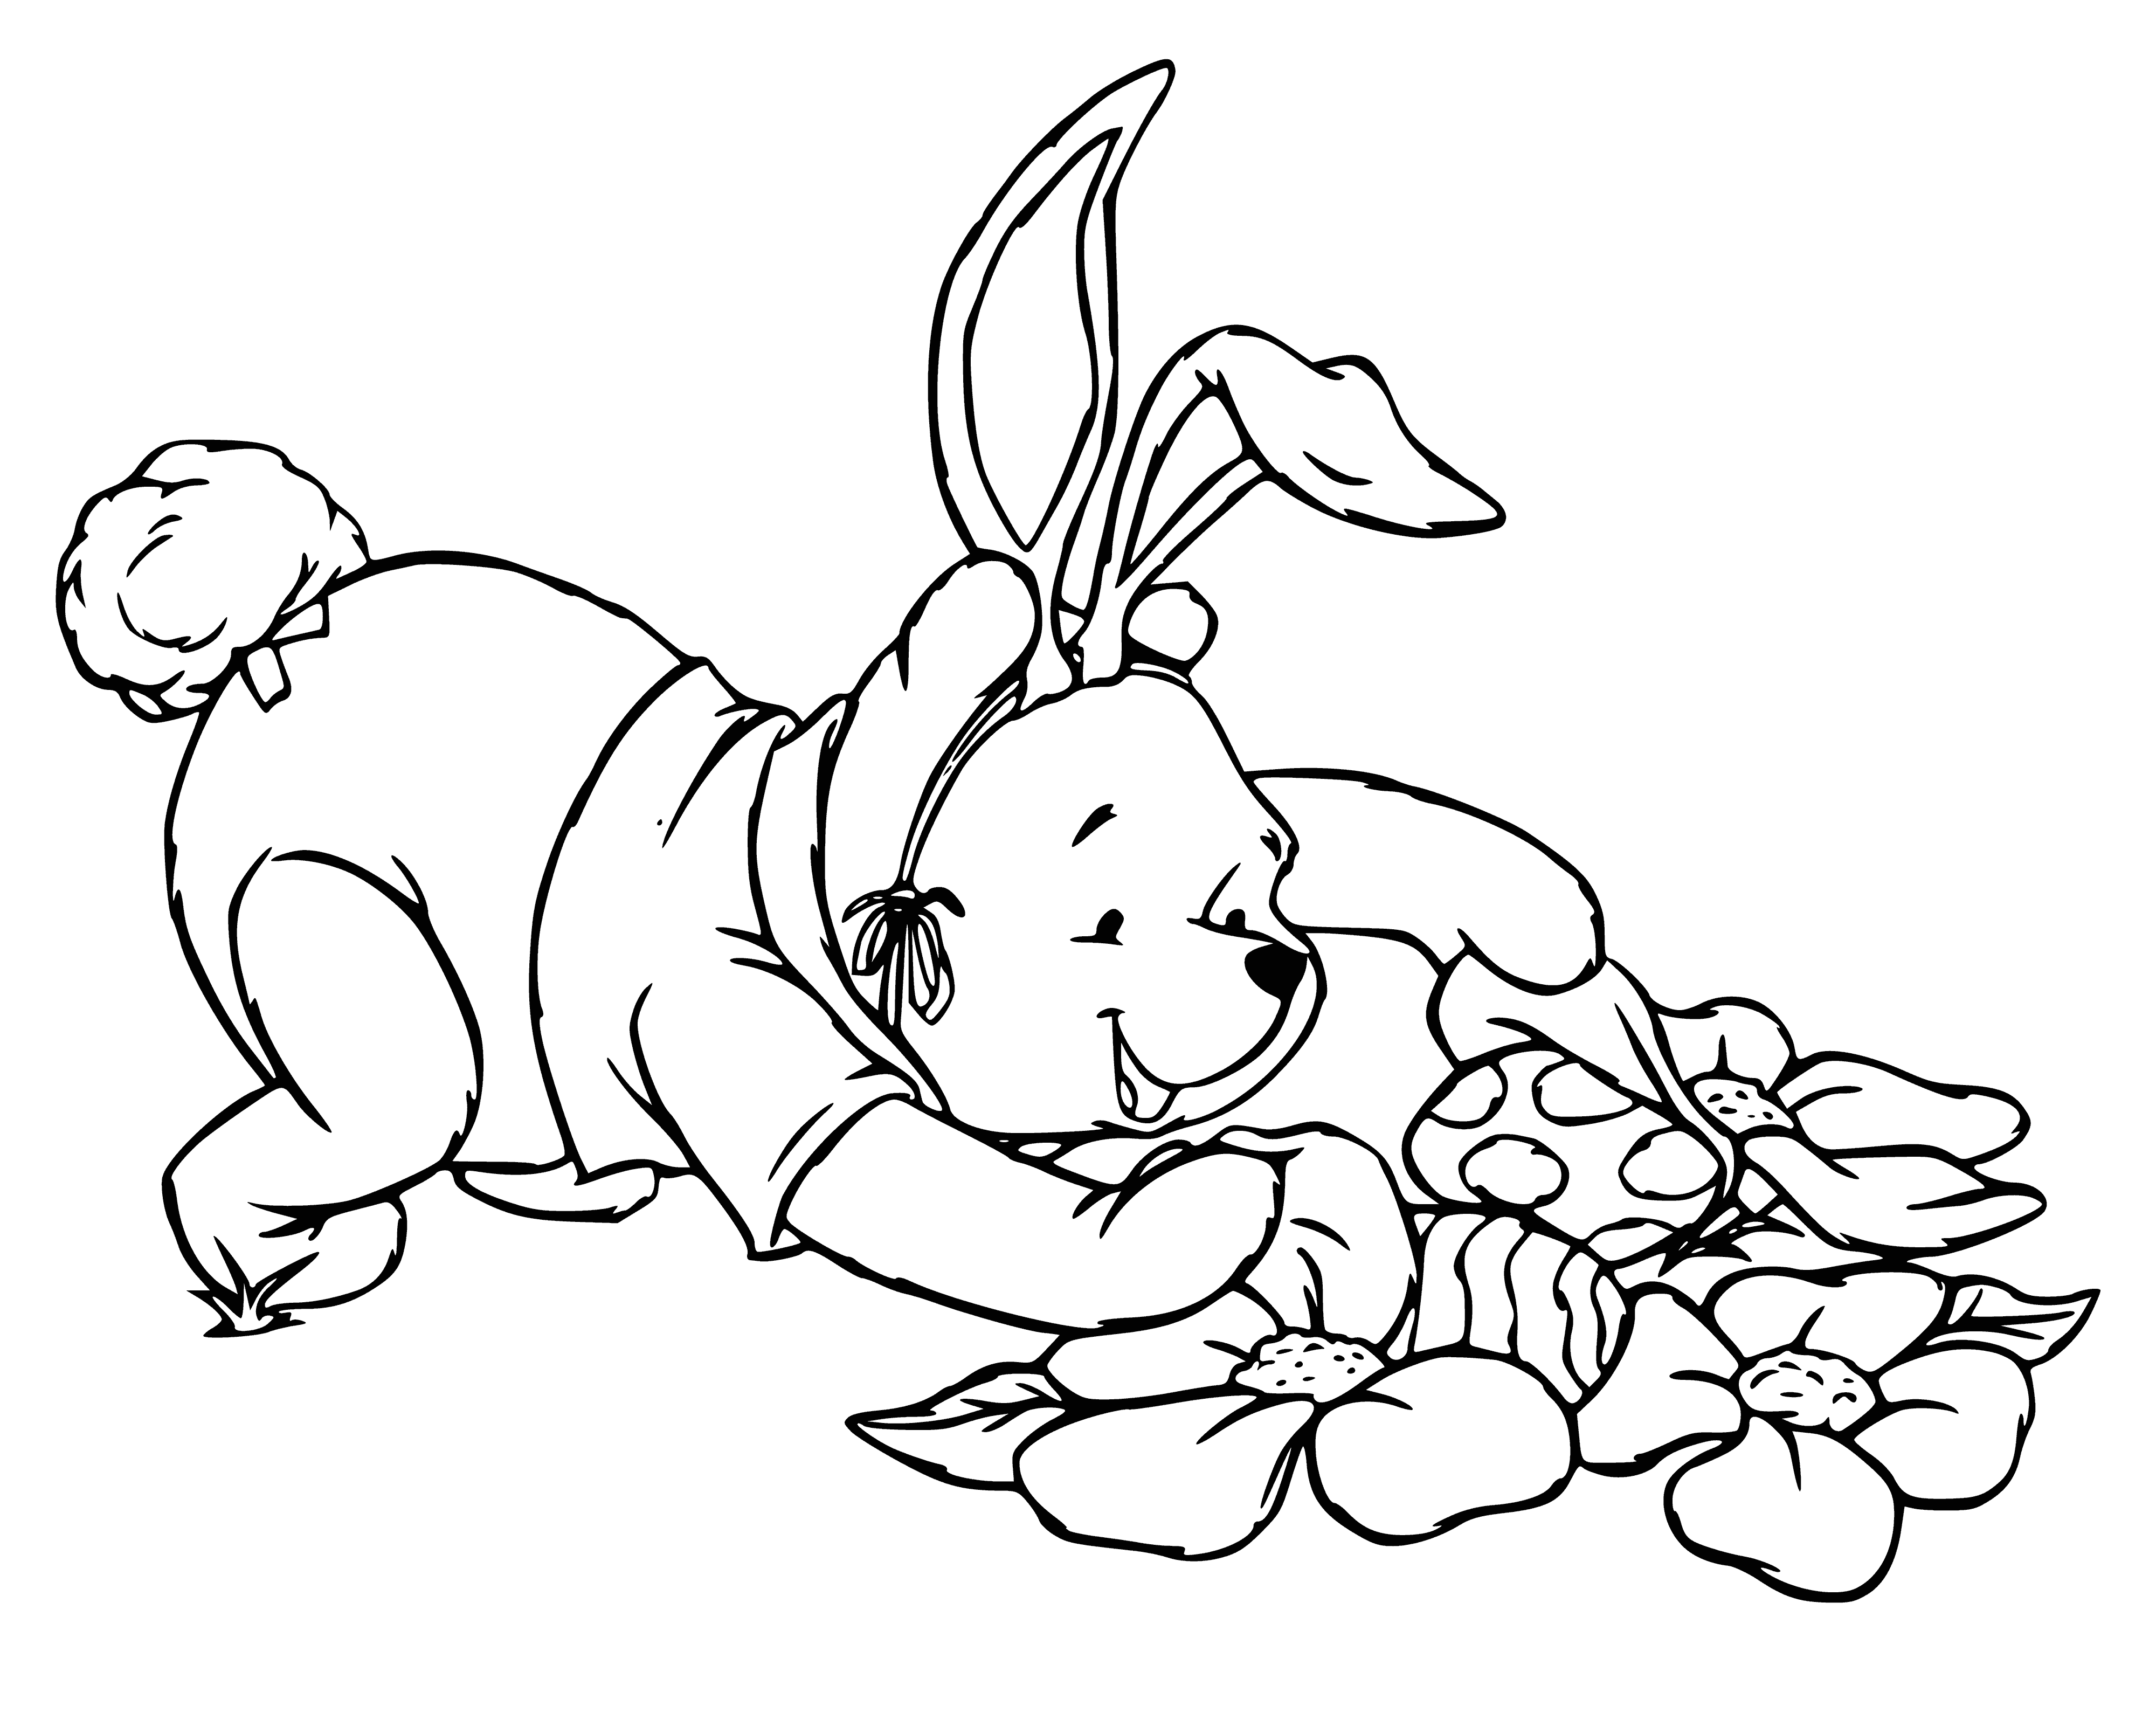 coloring page: Winnie the Pooh dressed as Easter bunny with white rabbit & bluebird, holding eggs & in meadow w/ blooming flowers.